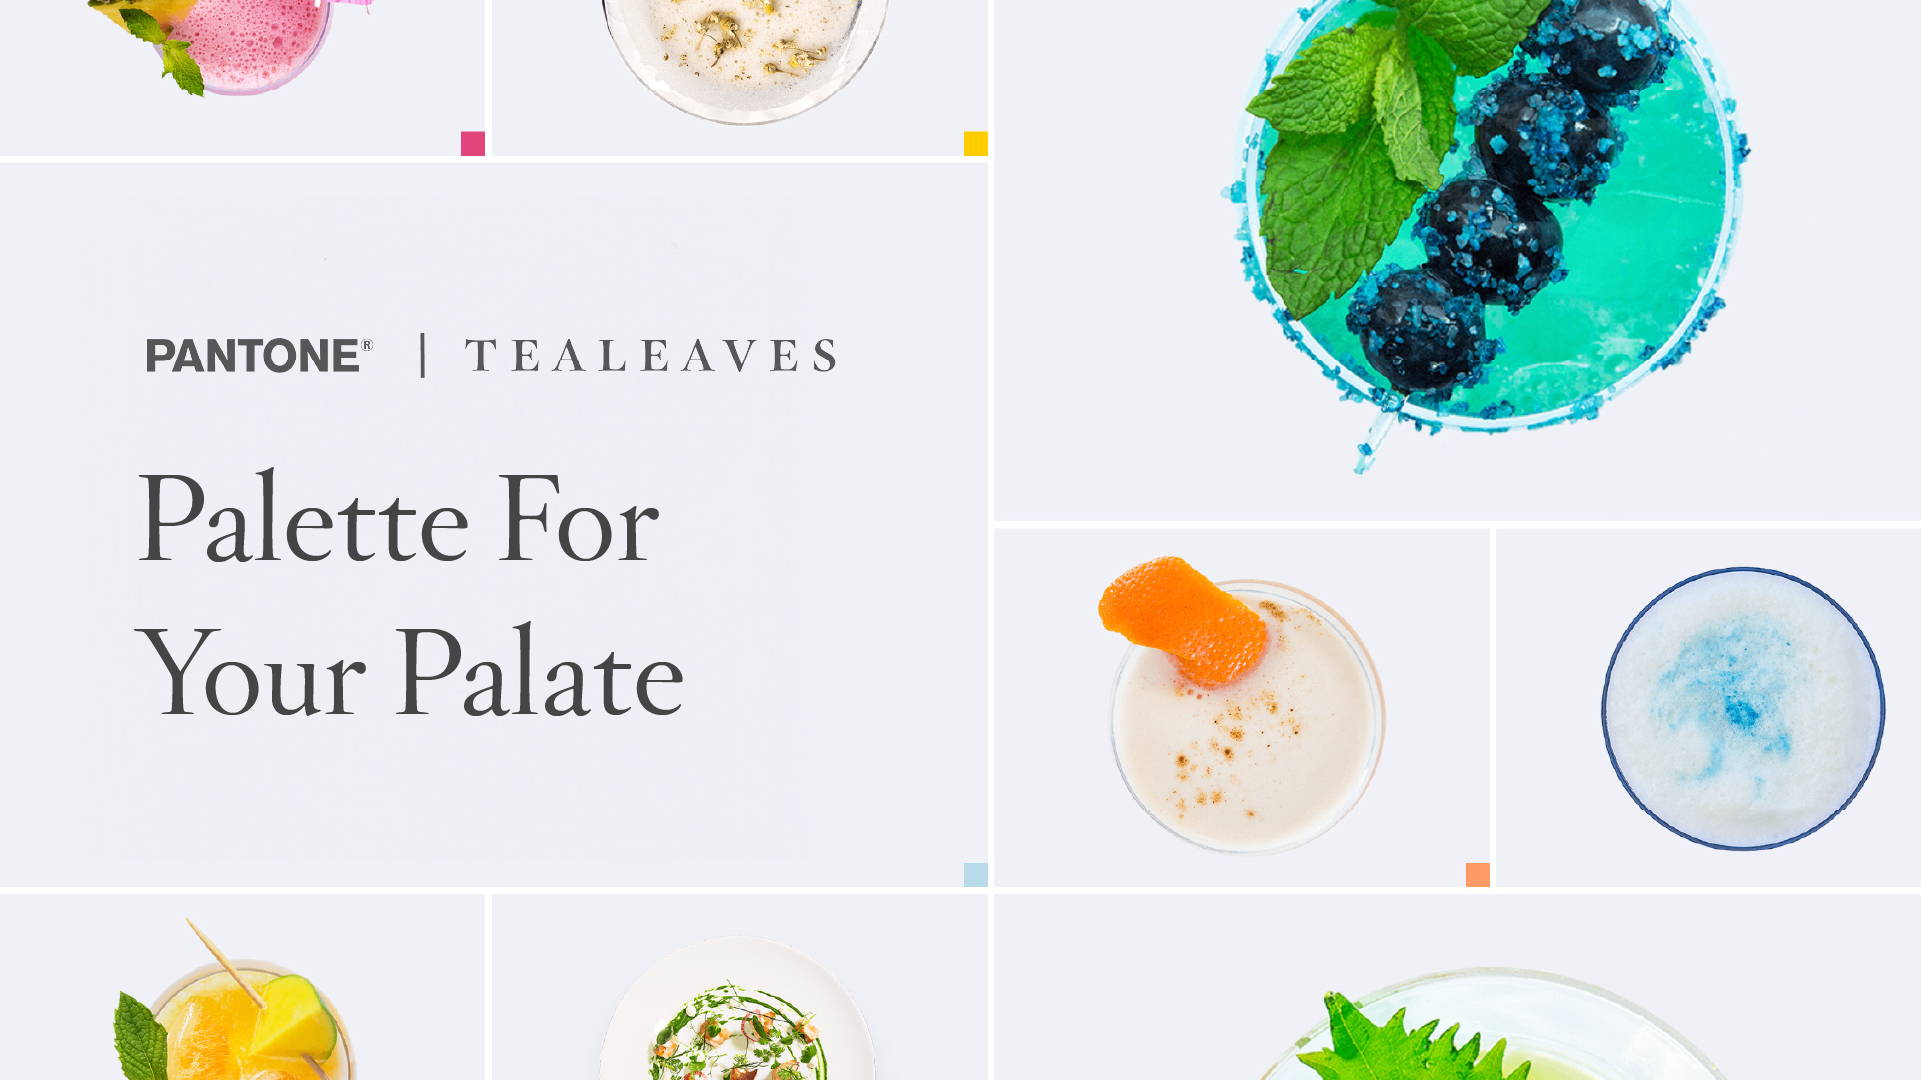 Palette For Your Palate